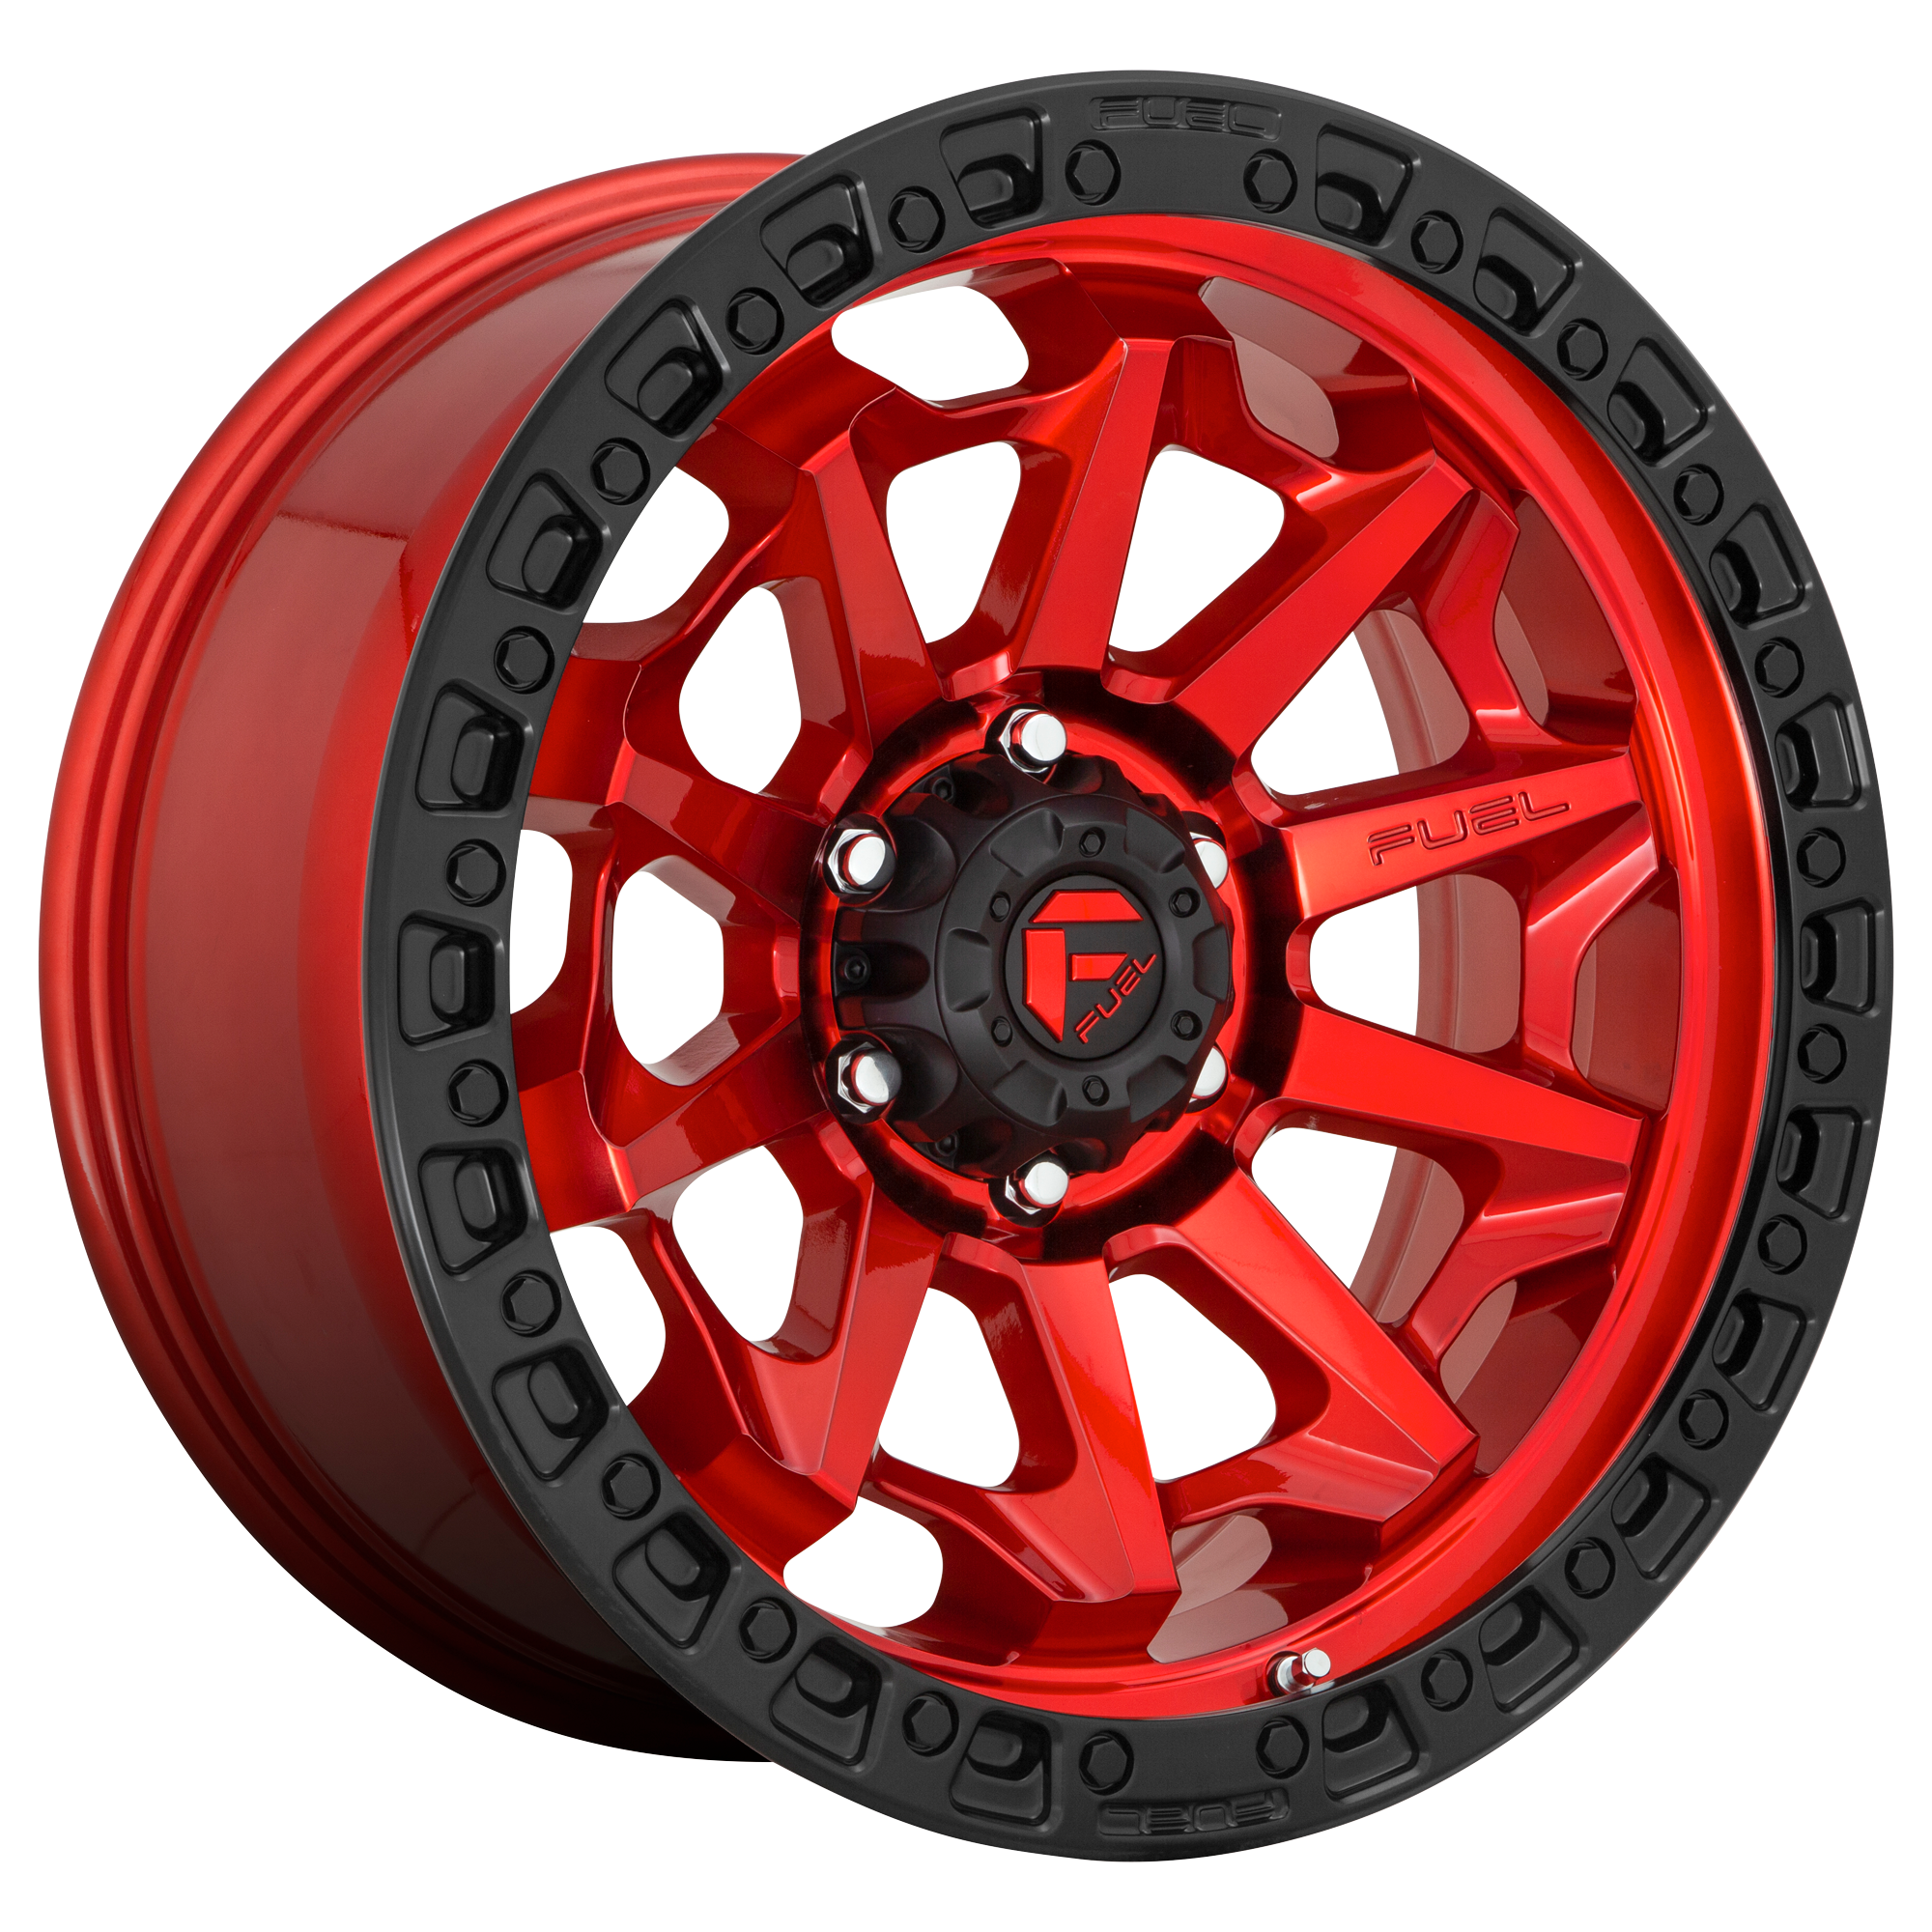 COVERT 20x10 5x127.00 CANDY RED BLACK BEAD RING (-18 mm) - Tires and Engine Performance